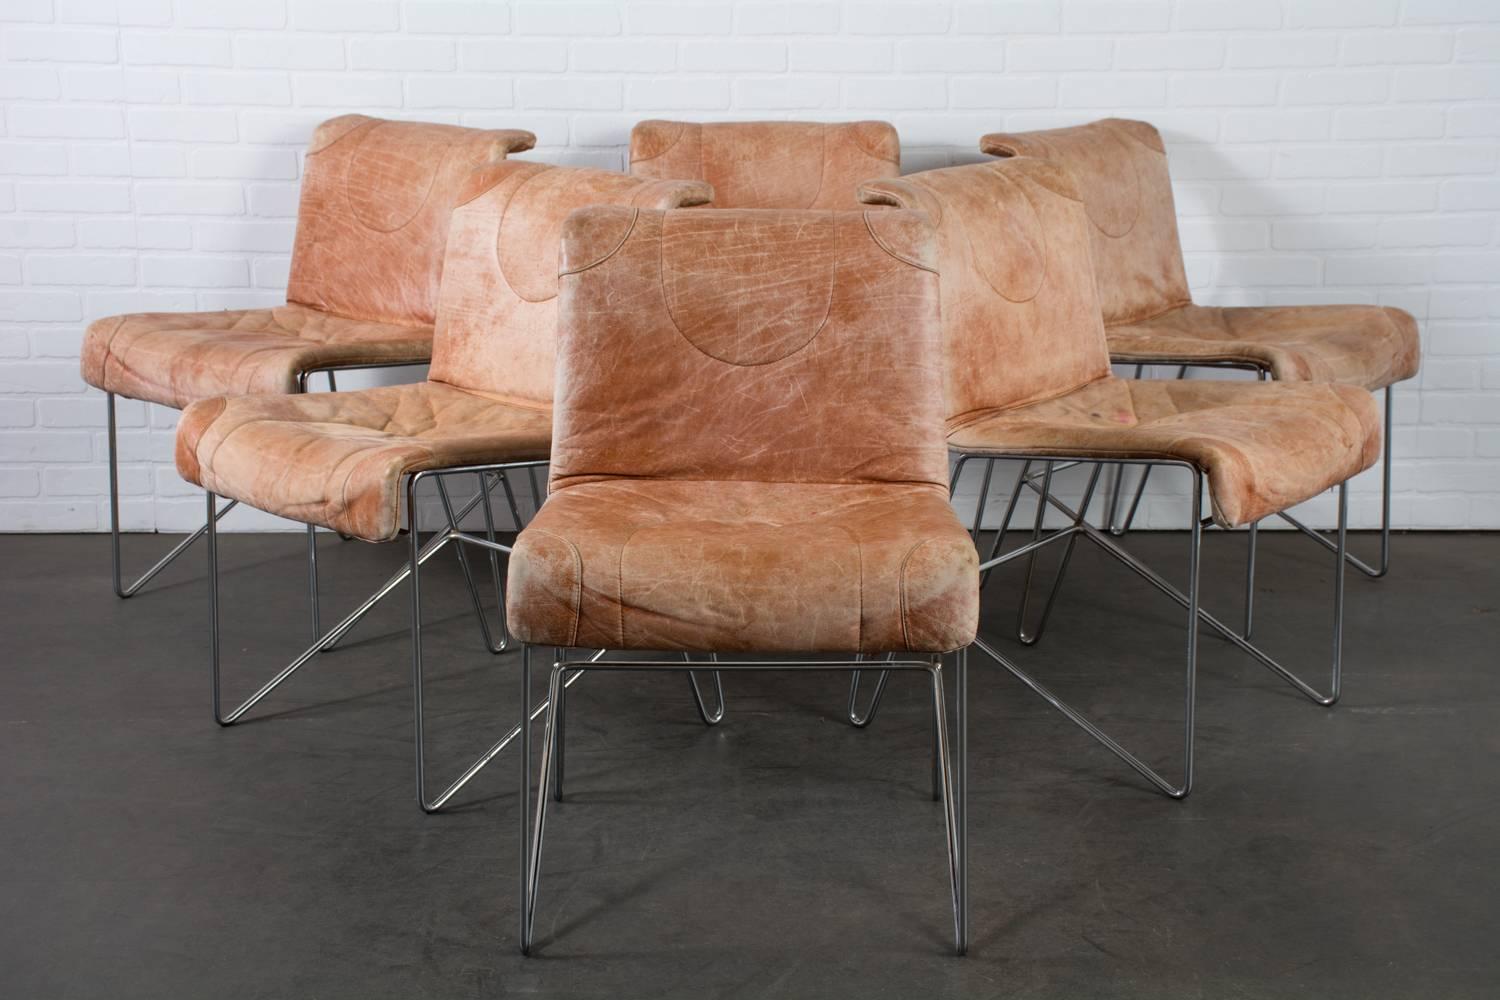 This set of six vintage midcentury Italian dining chairs are by i4 Mariani. We believe they were designed by Guido Faleschini who designed many chrome and leather chairs for i4 Mariani in the 1960's and 1970's. These chairs have metal bases with a